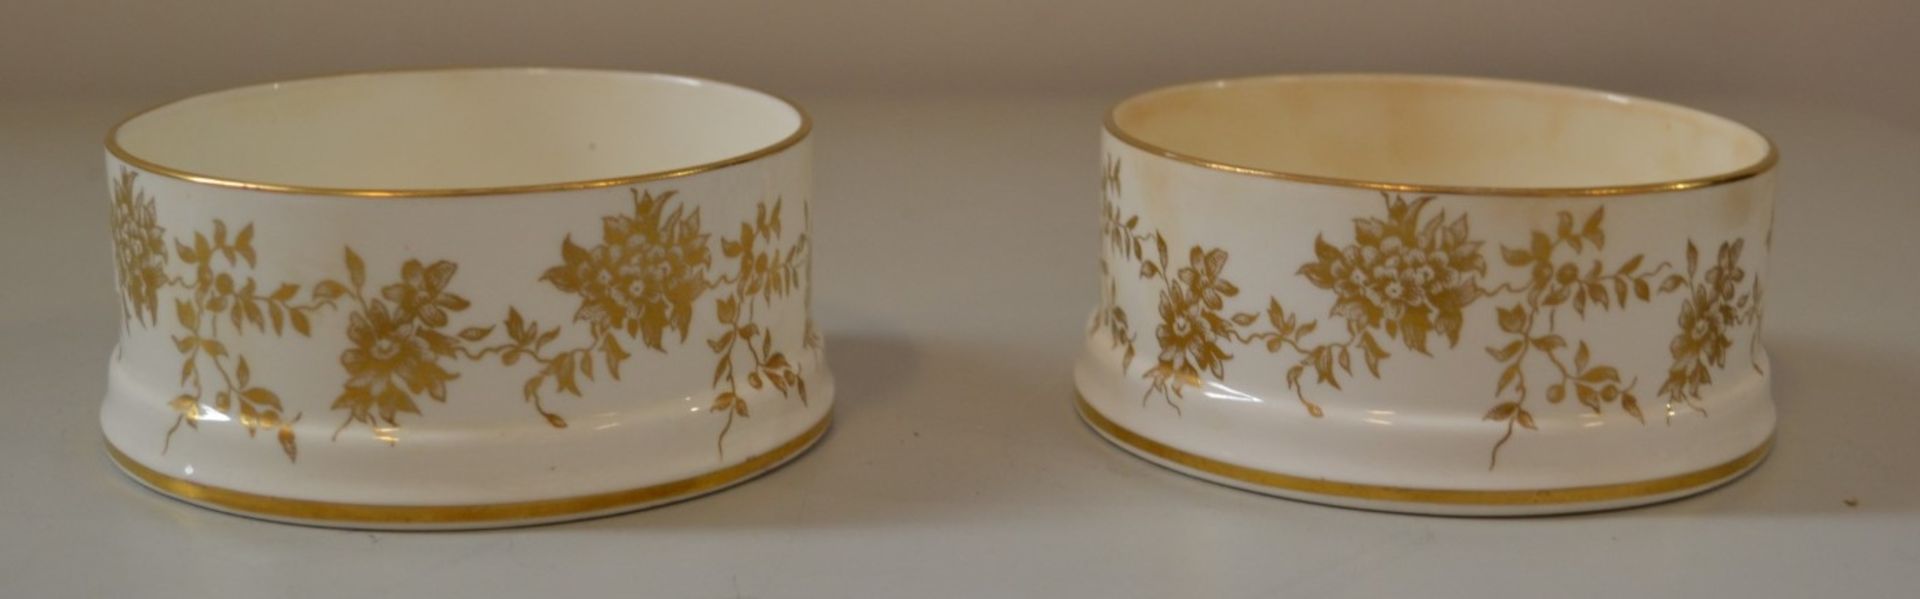 1 x Pair of Staffordshire Bone China Pots - Ref J2155 - CL314 - Image 3 of 3